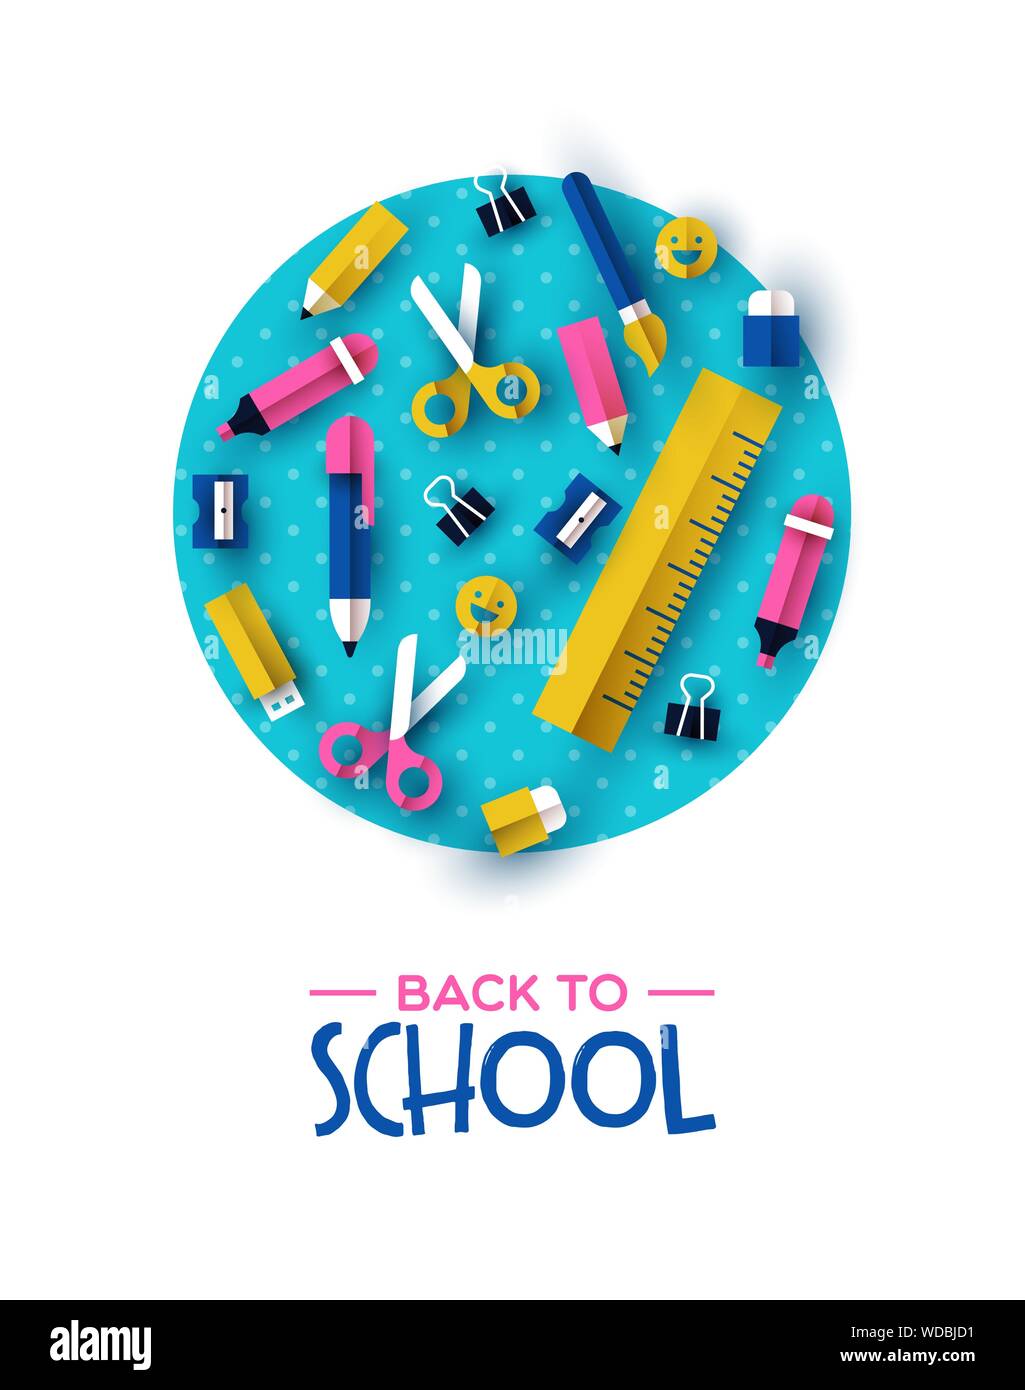 Back to school card illustration of colorful 3d papercut children supplies on color circle background. Fun kids event design, paper cut icons include Stock Vector